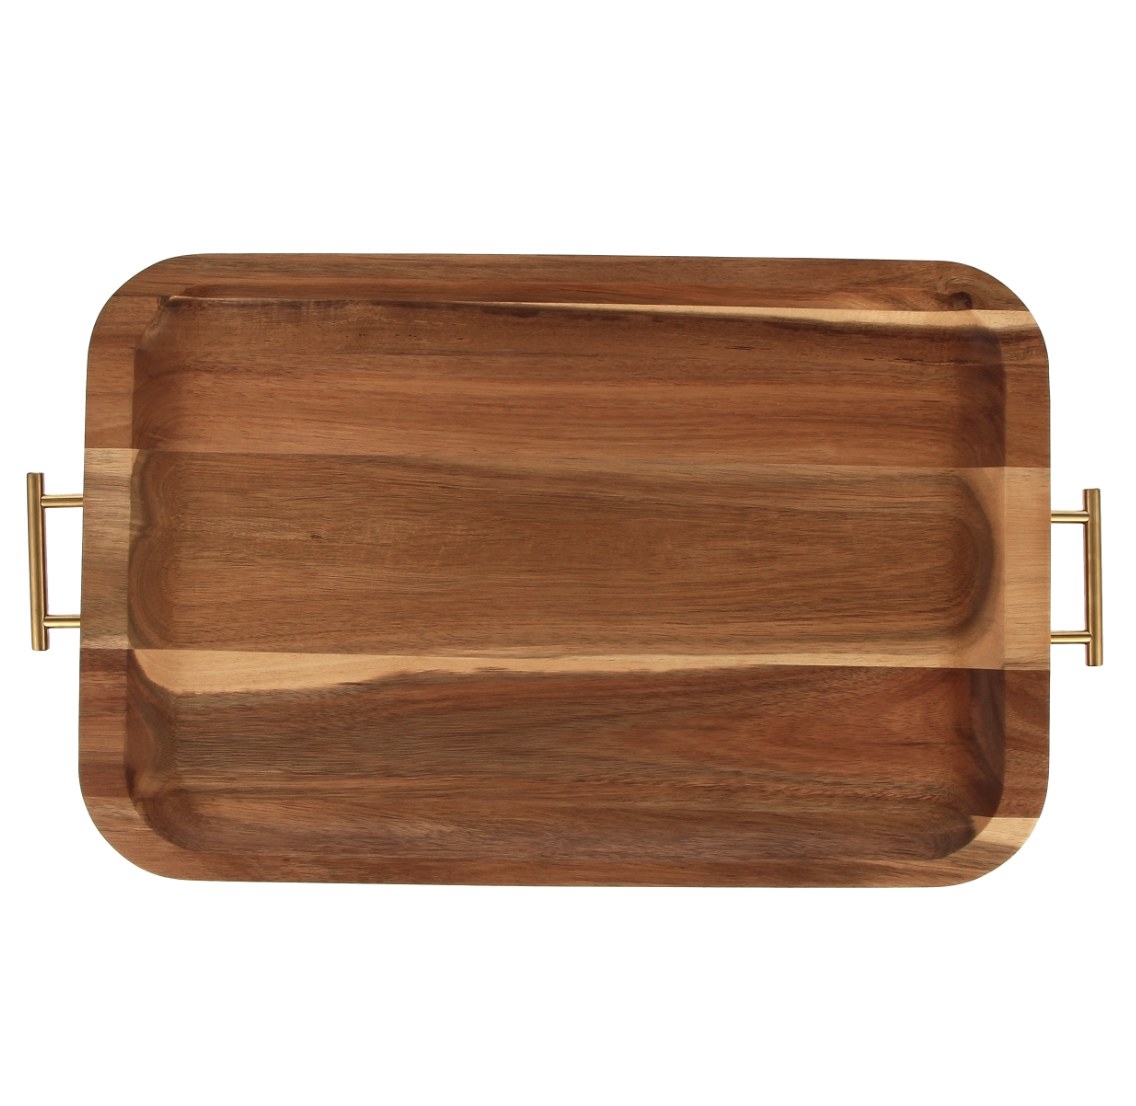 The brown acacia wood tray has gold stainless steel handles